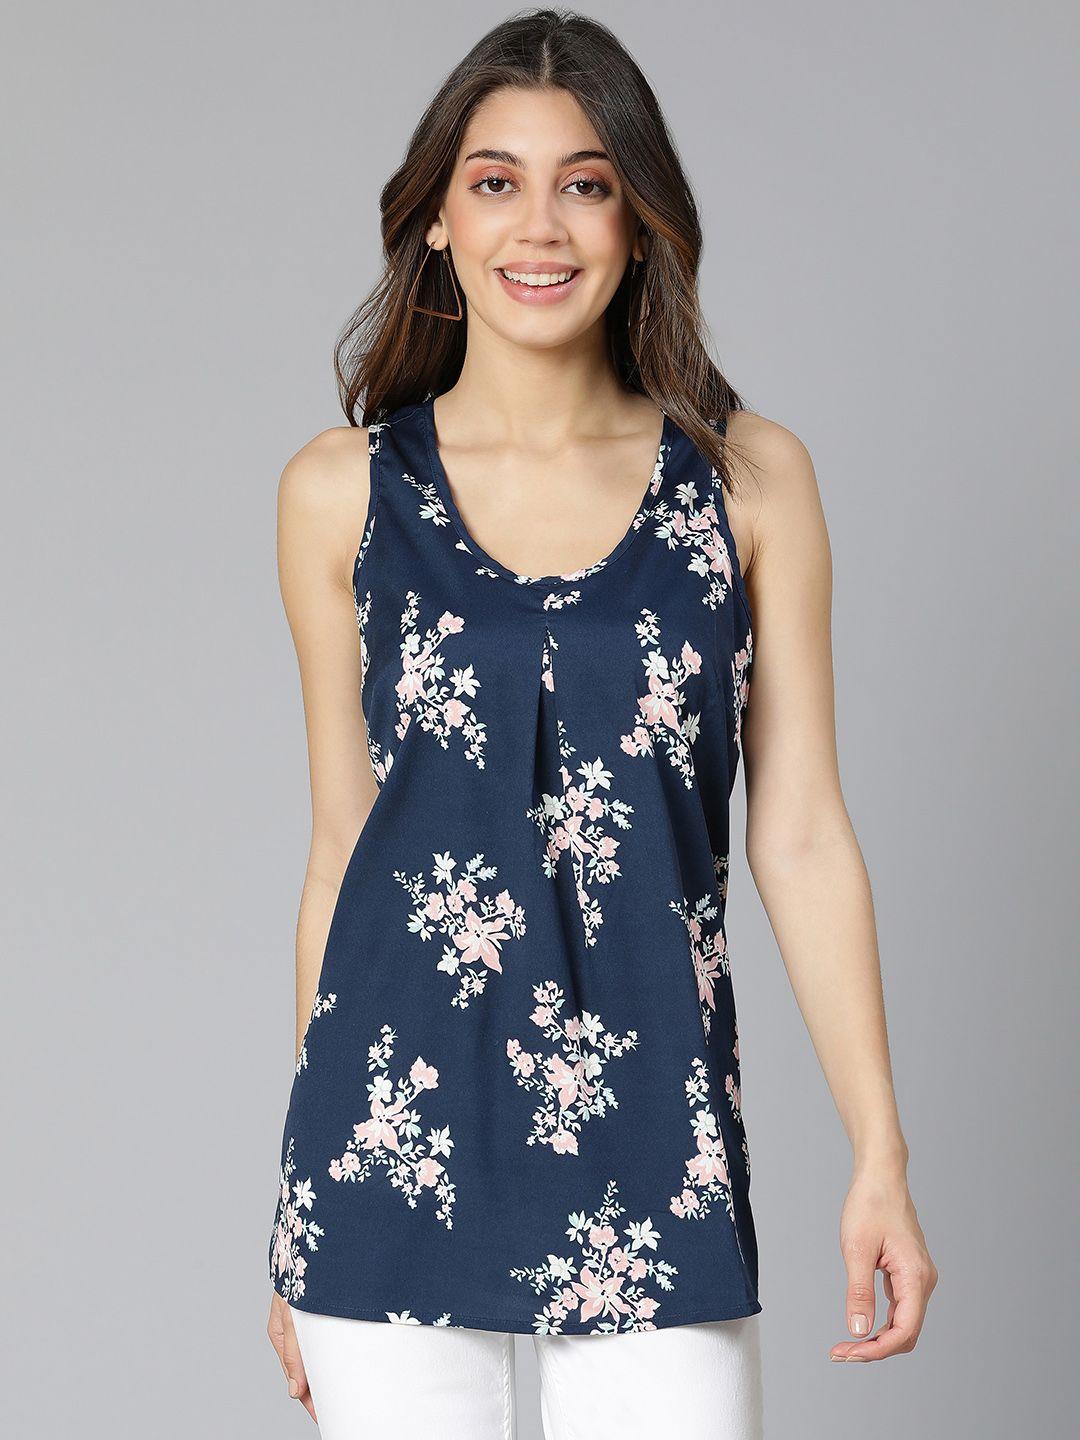 oxolloxo blue & white floral print top